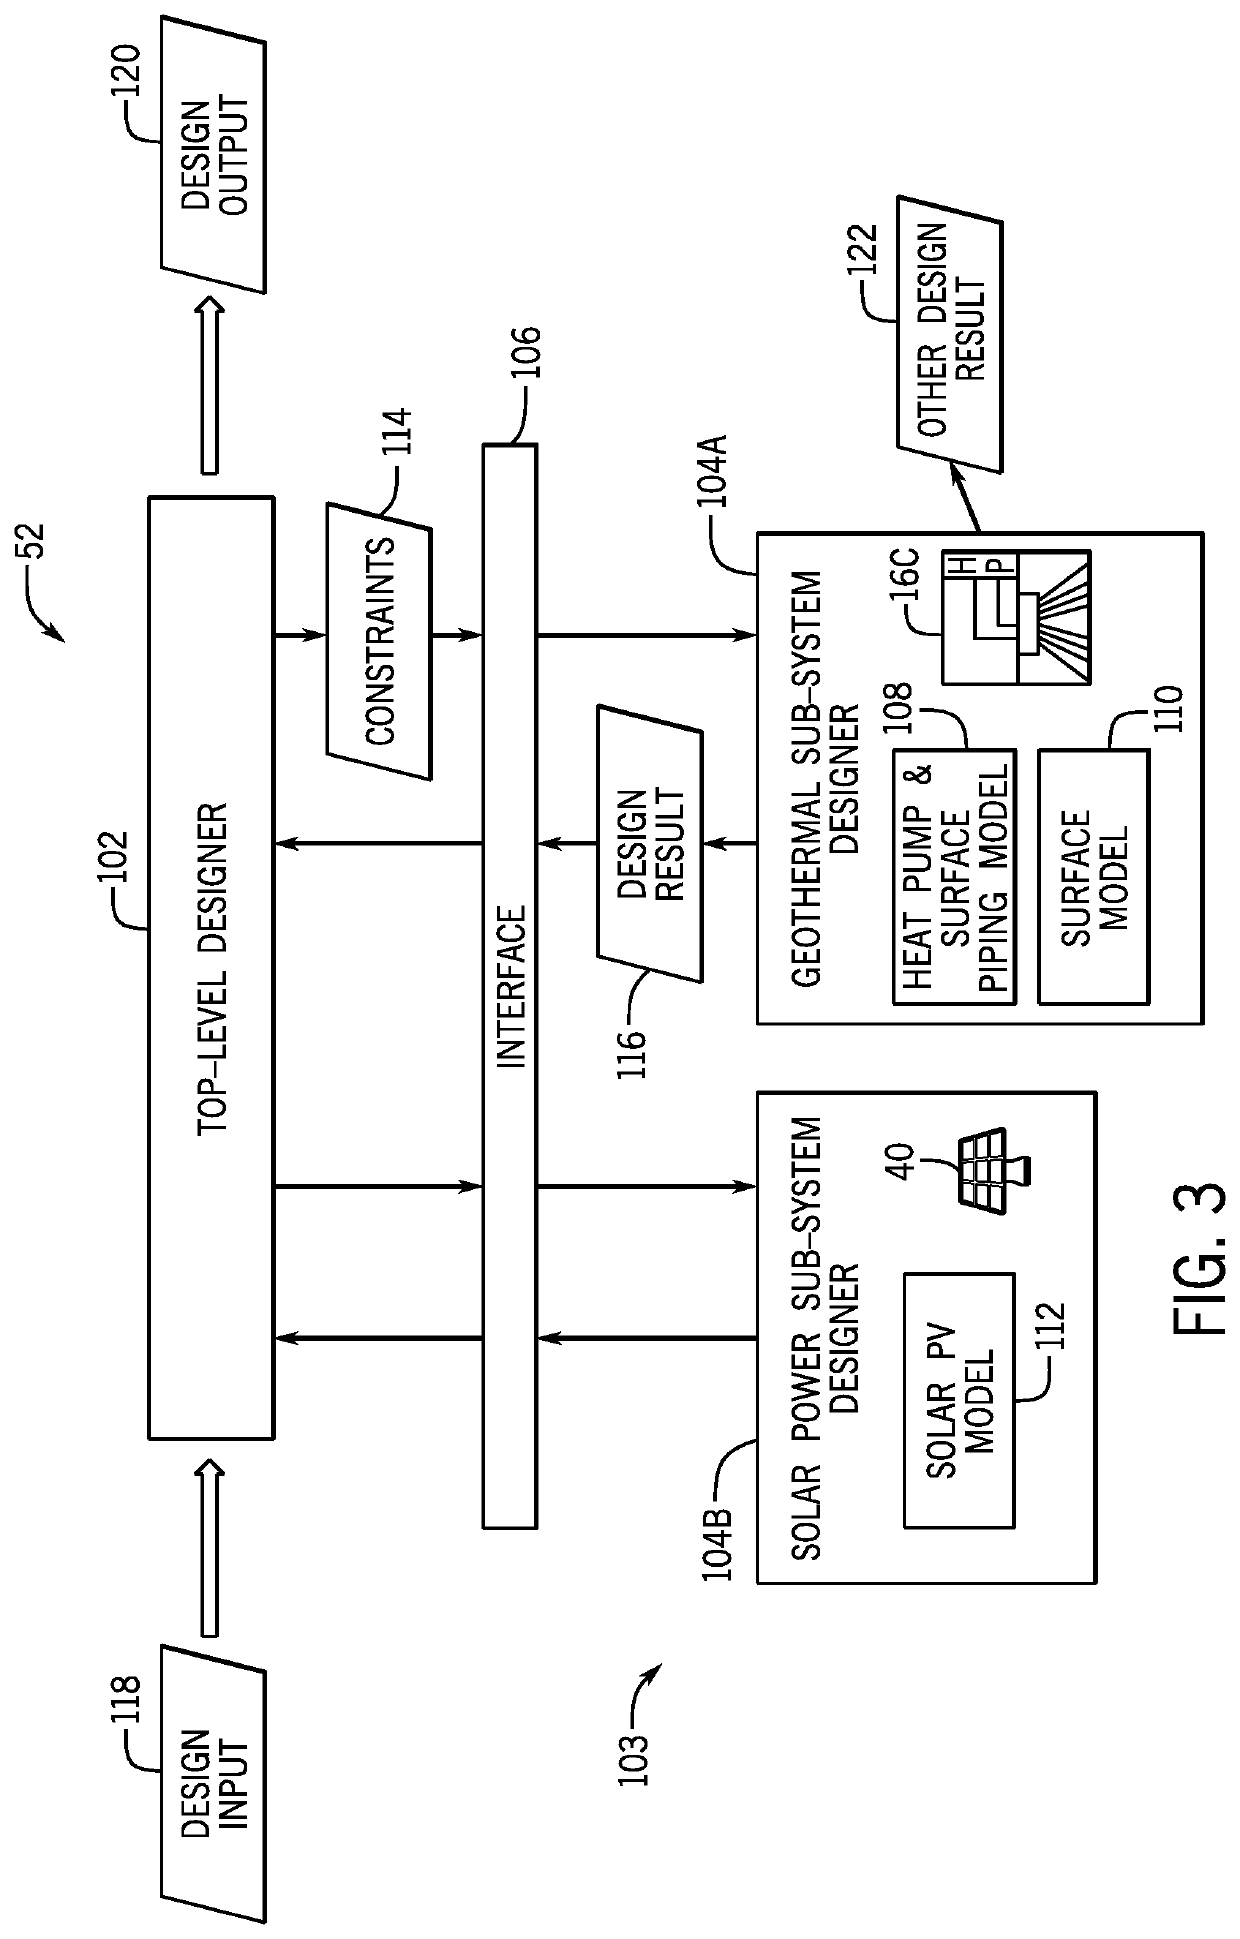 Distributed energy resource system design and operation